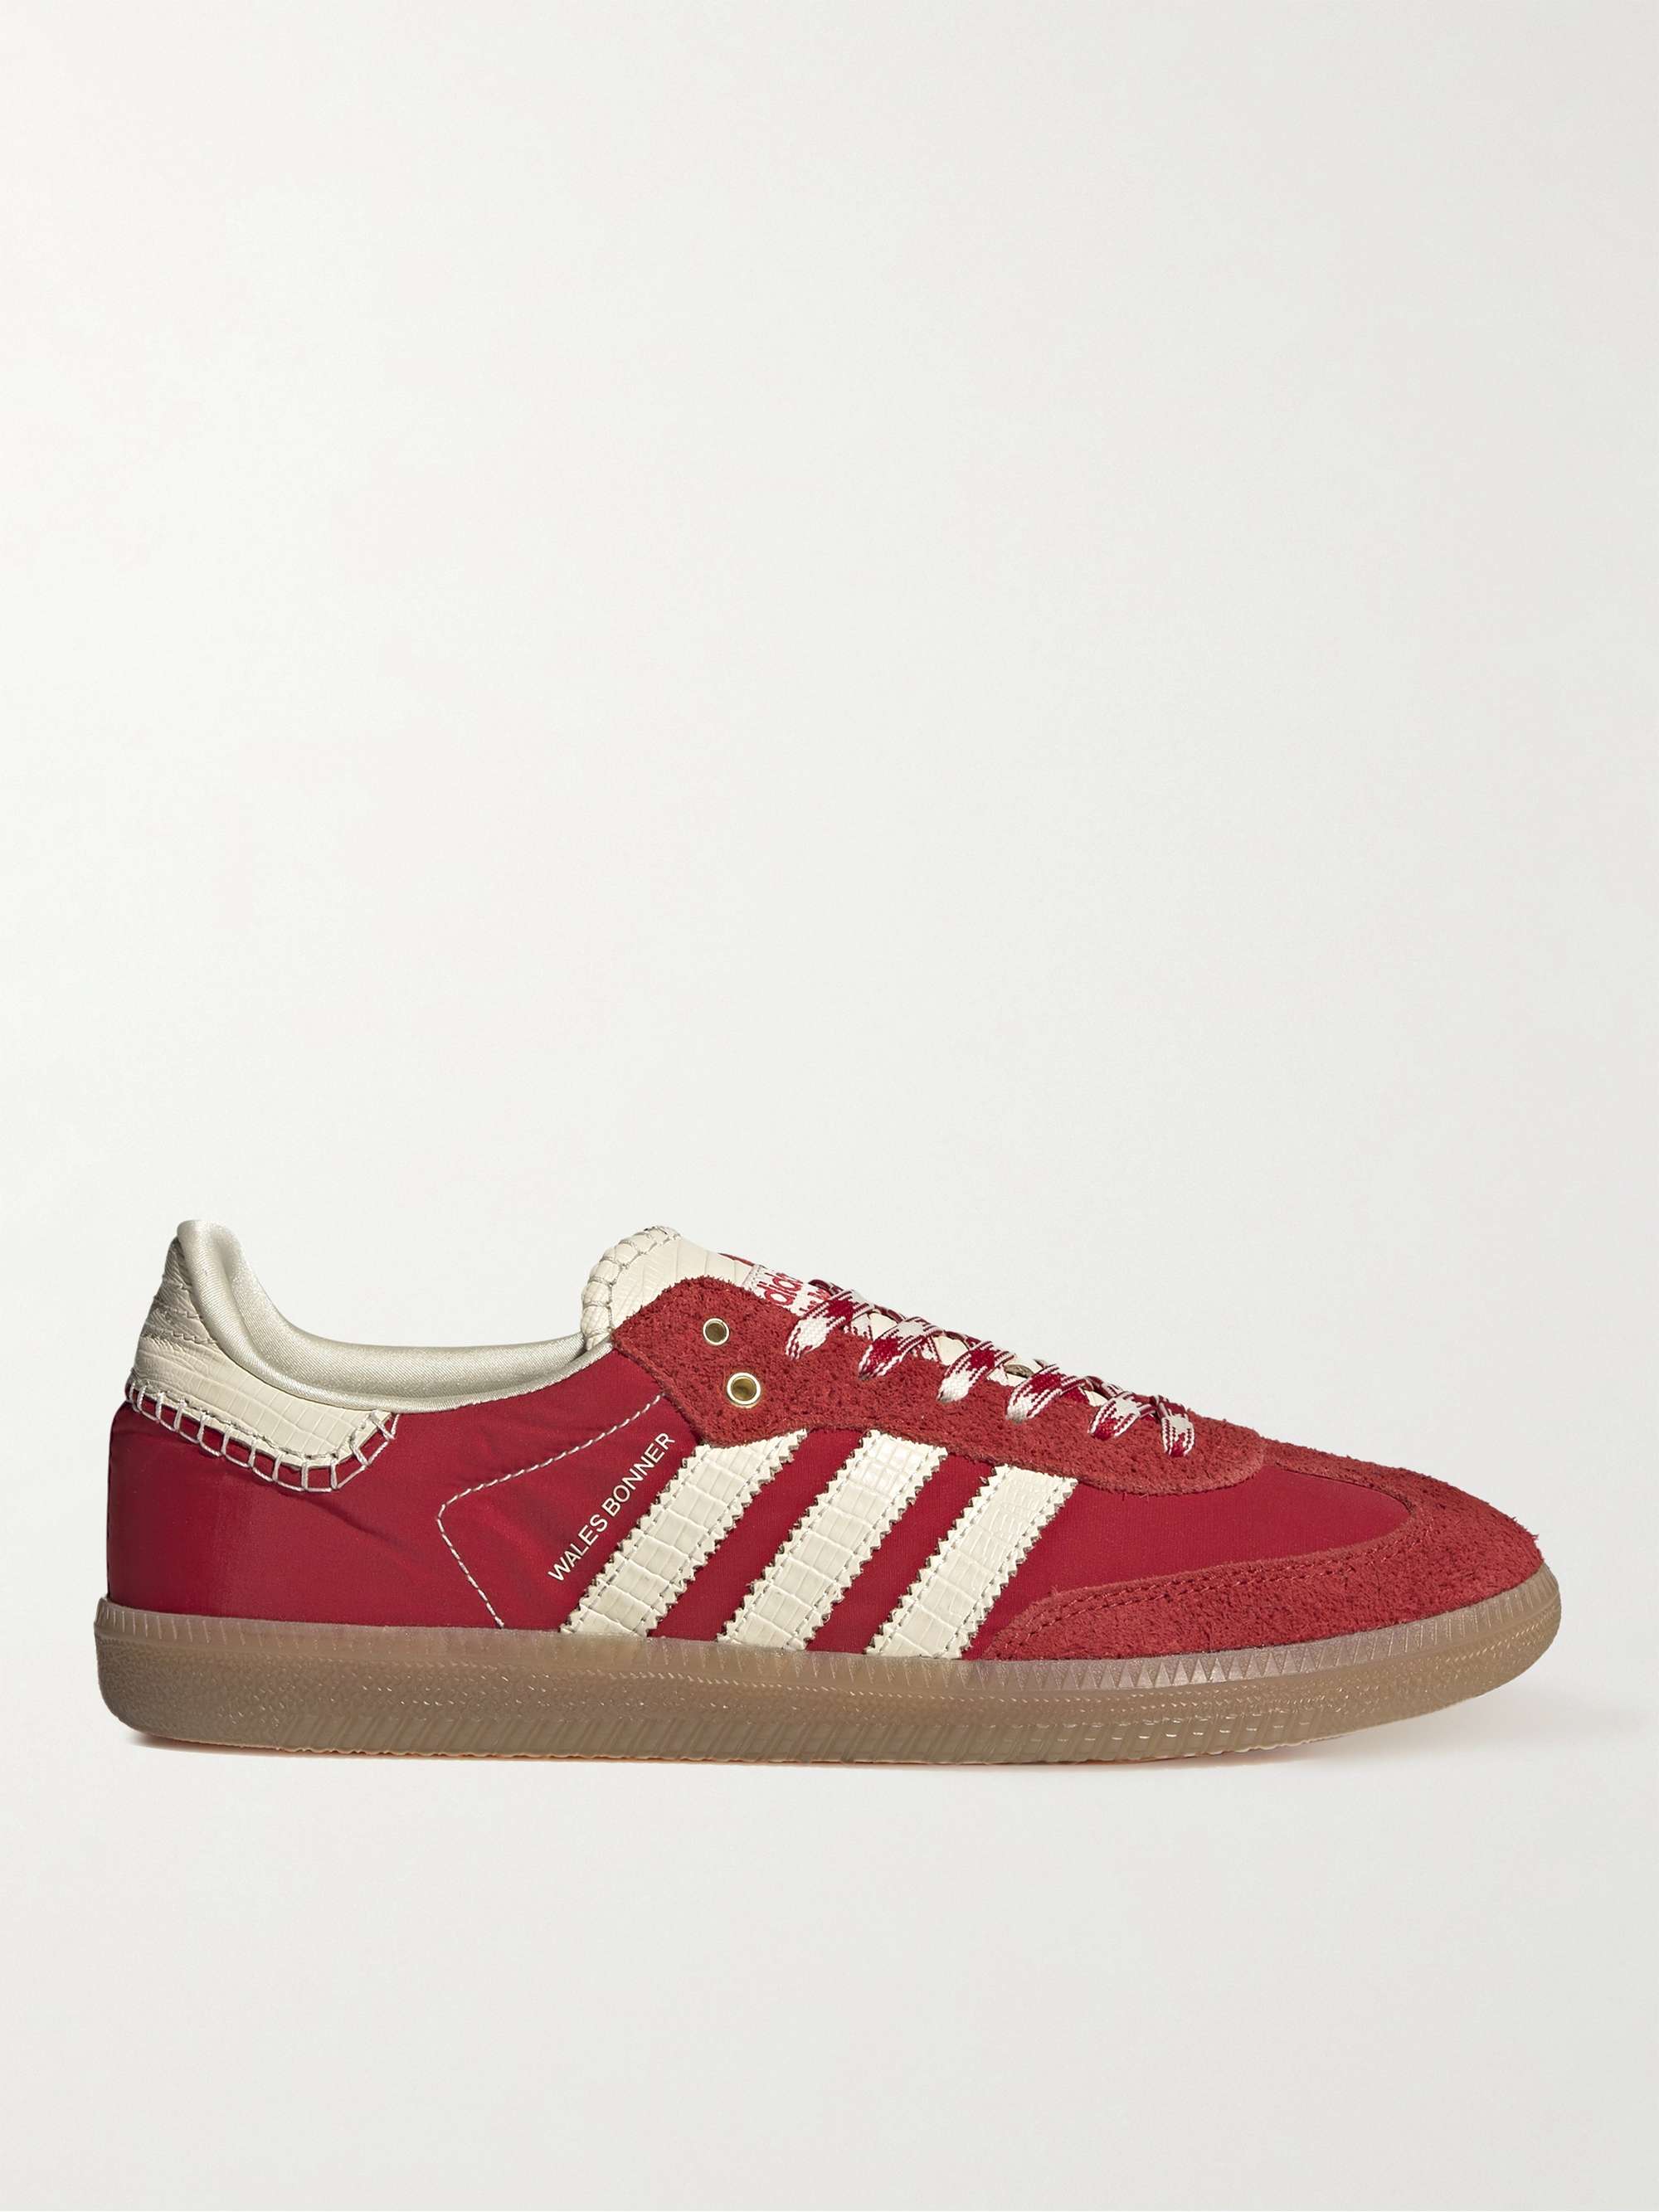 ADIDAS CONSORTIUM + Wales Bonner Samba Suede and Croc-Effect Leather-Trimmed Nylon Sneakers